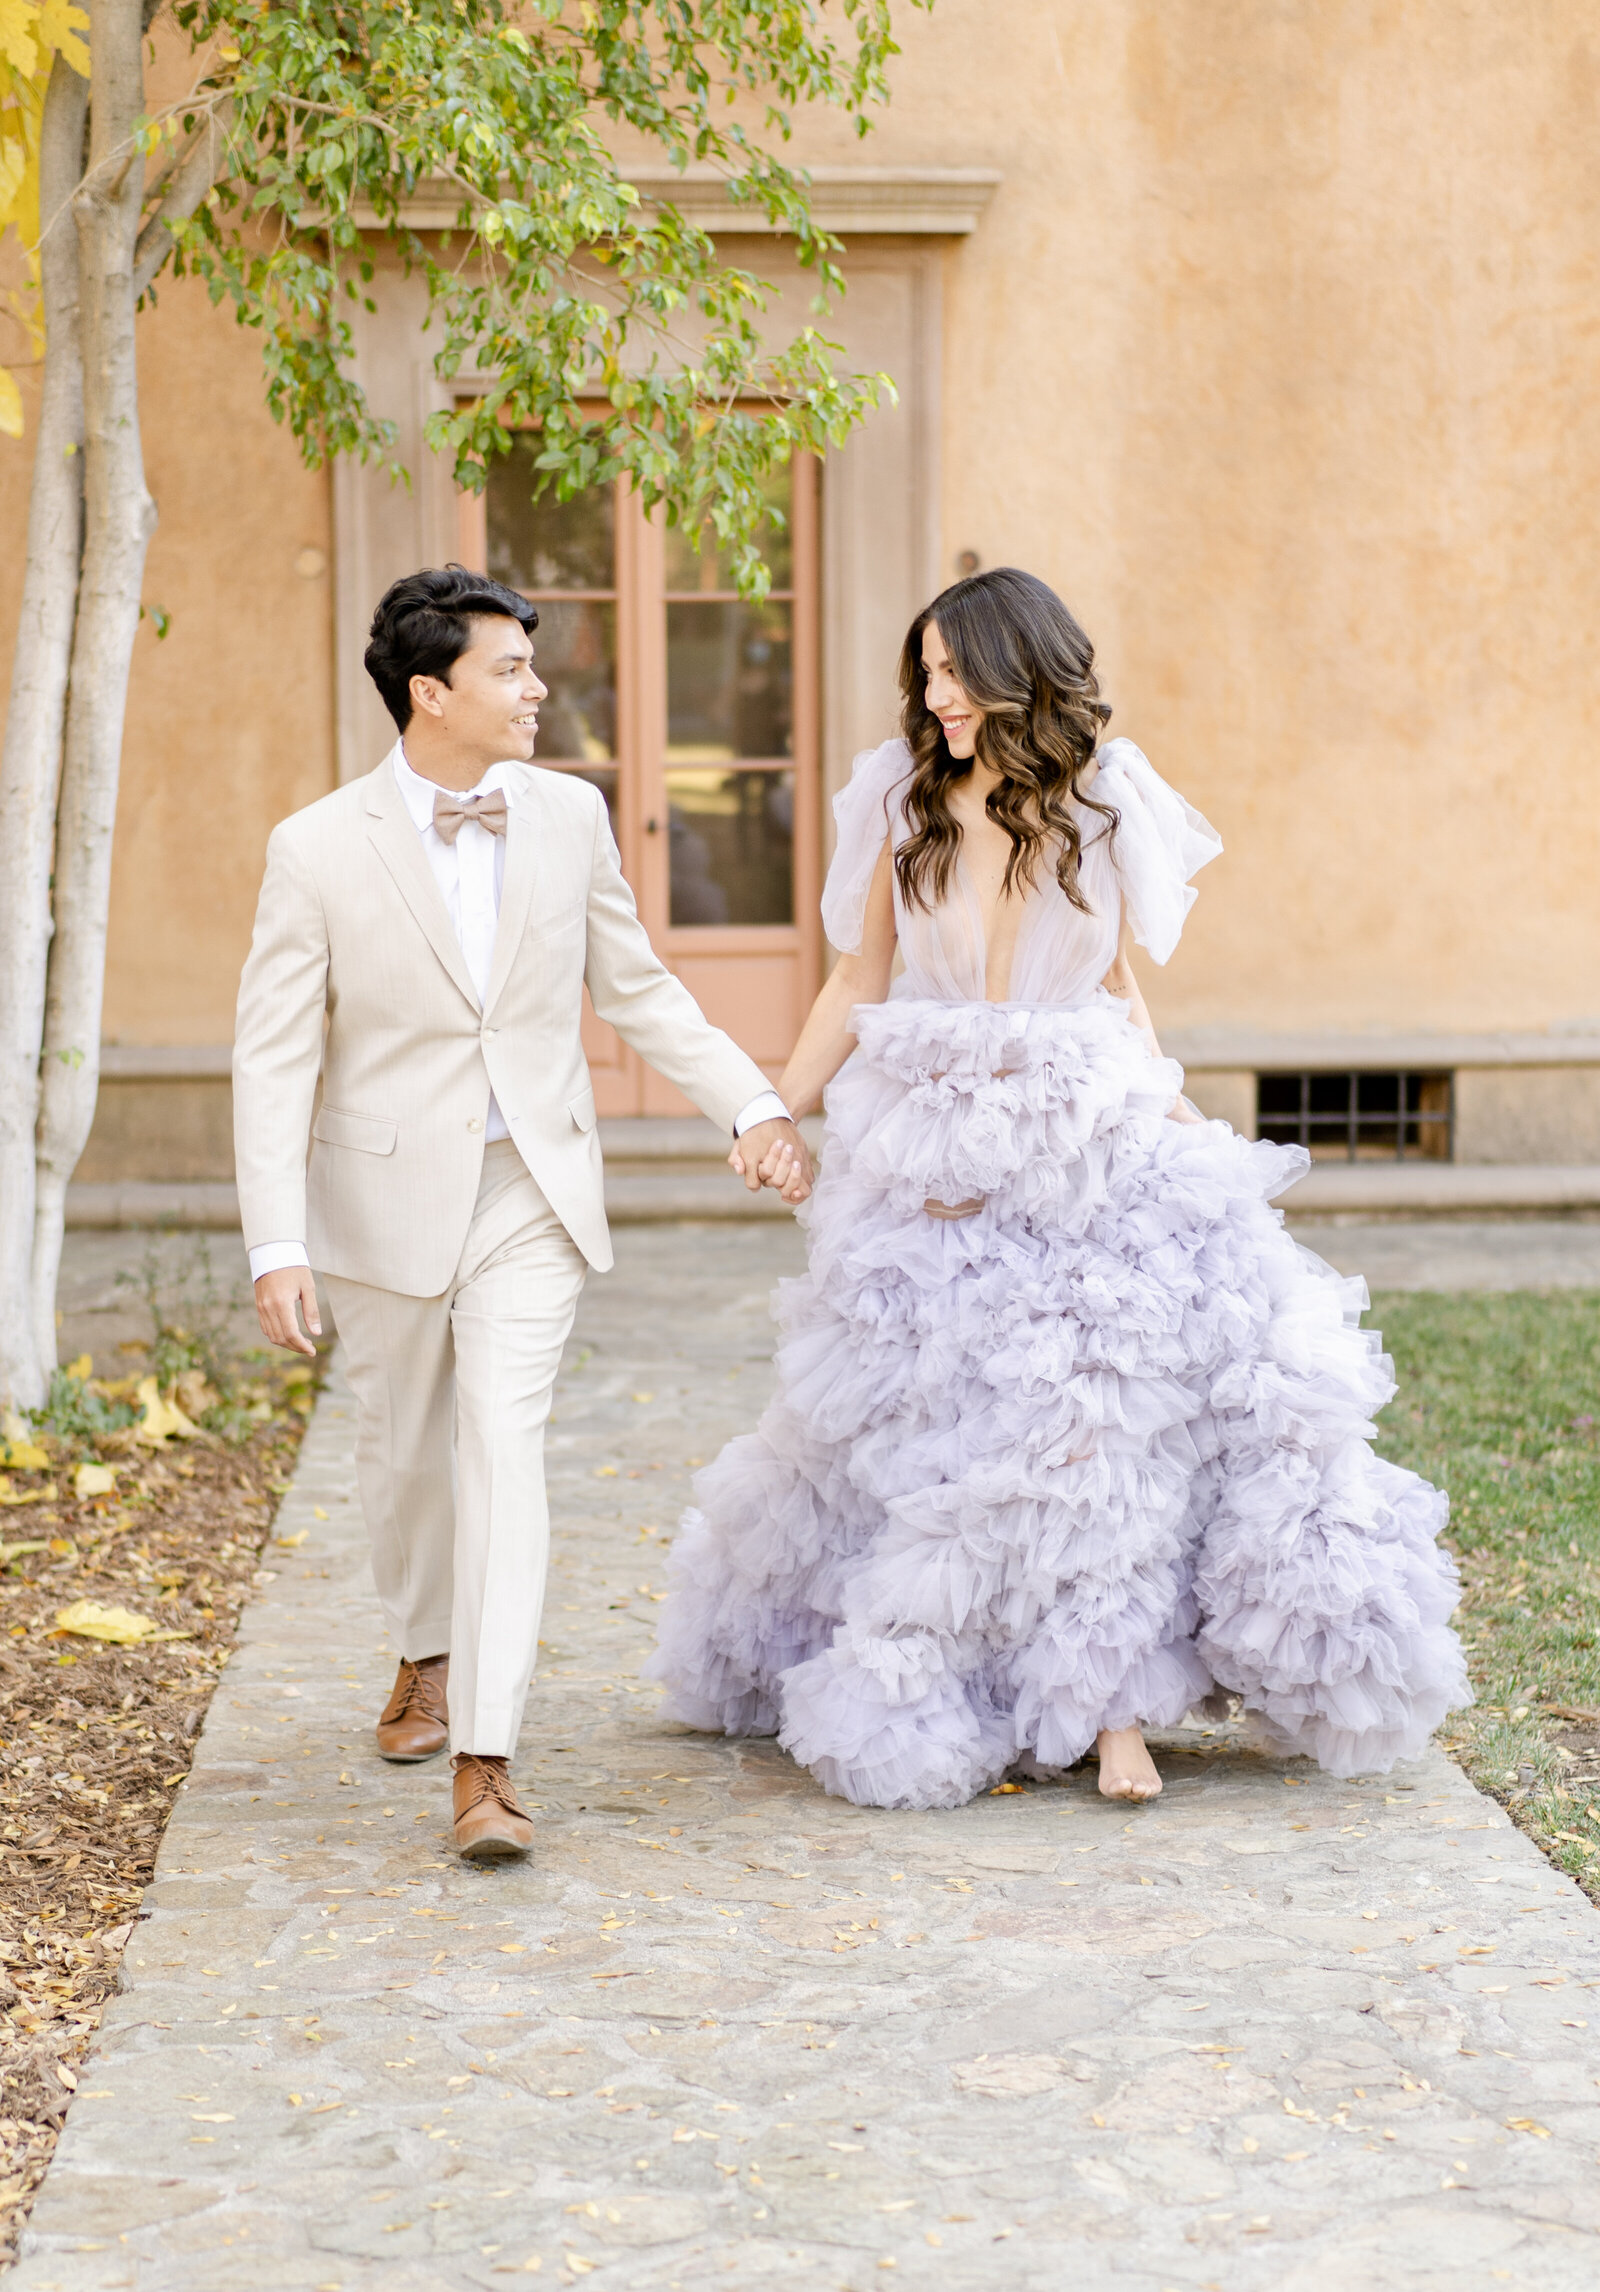 Portrait of bride and groom in a lavender gown and cream suit walking in front of a Spanish-style building with doors.